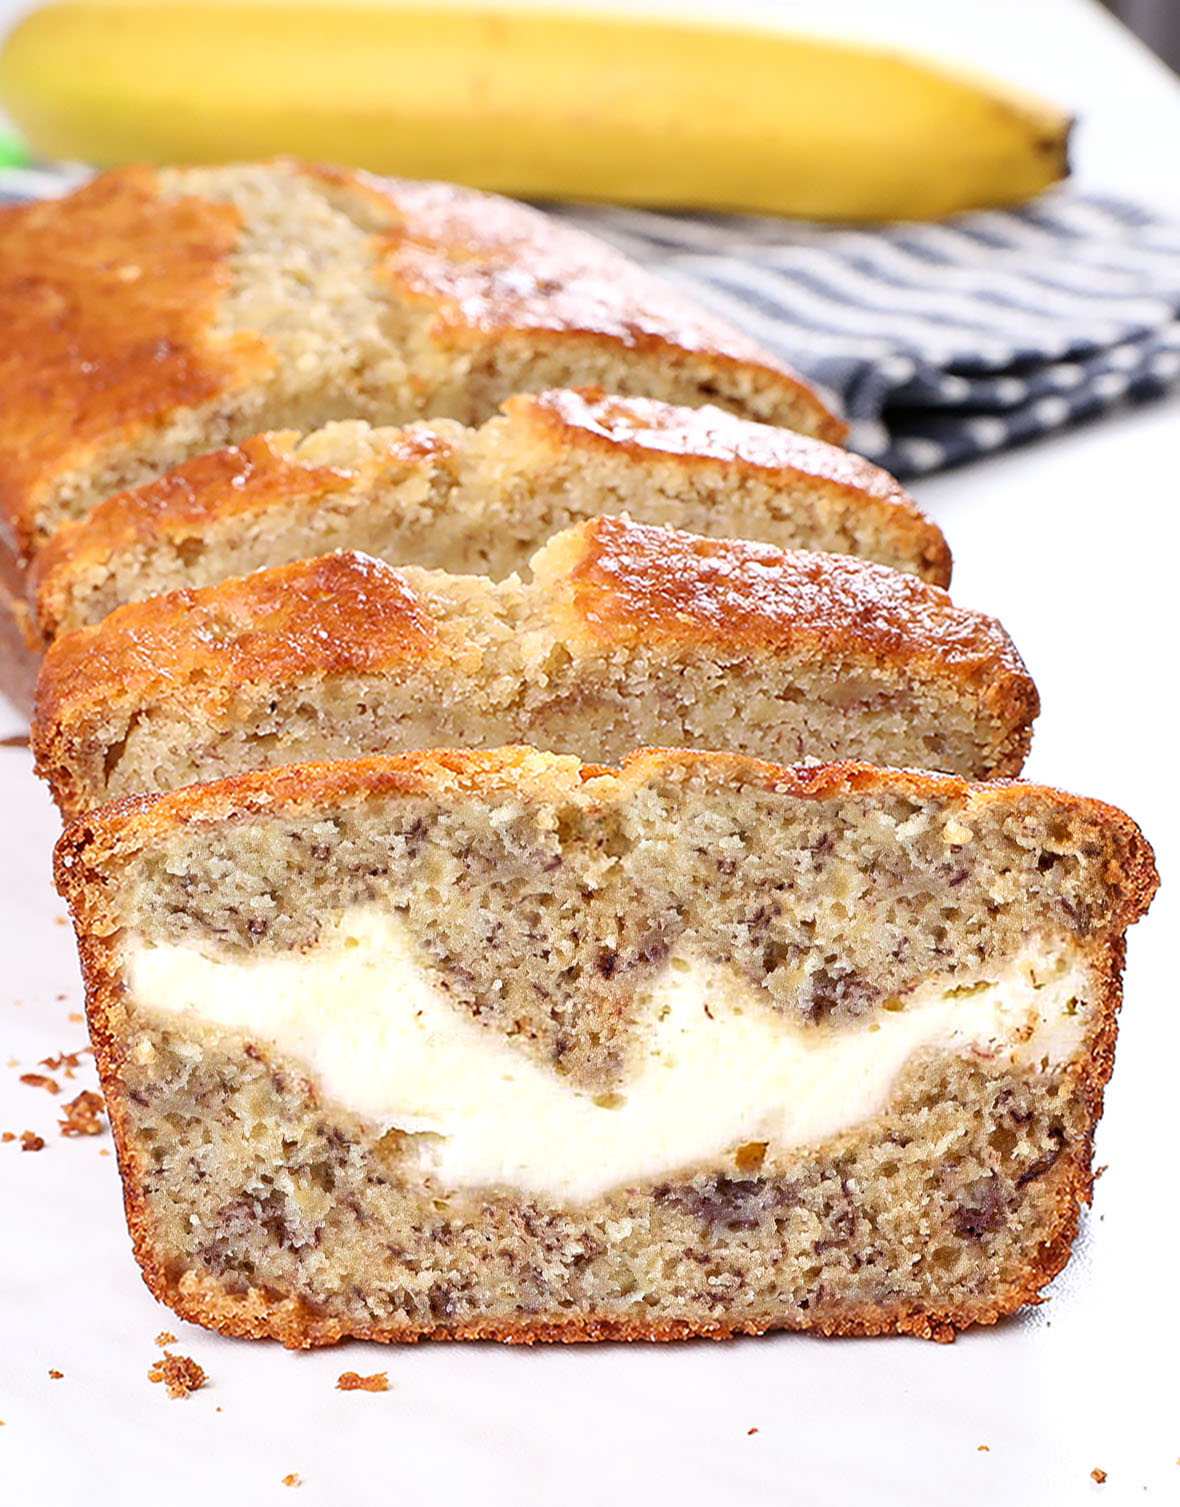 Cream Cheese Banana Bread - light, moist and delicious! This is the BEST homemade banana bread recipe! Perfect for breakfast, snacks, and dessert!